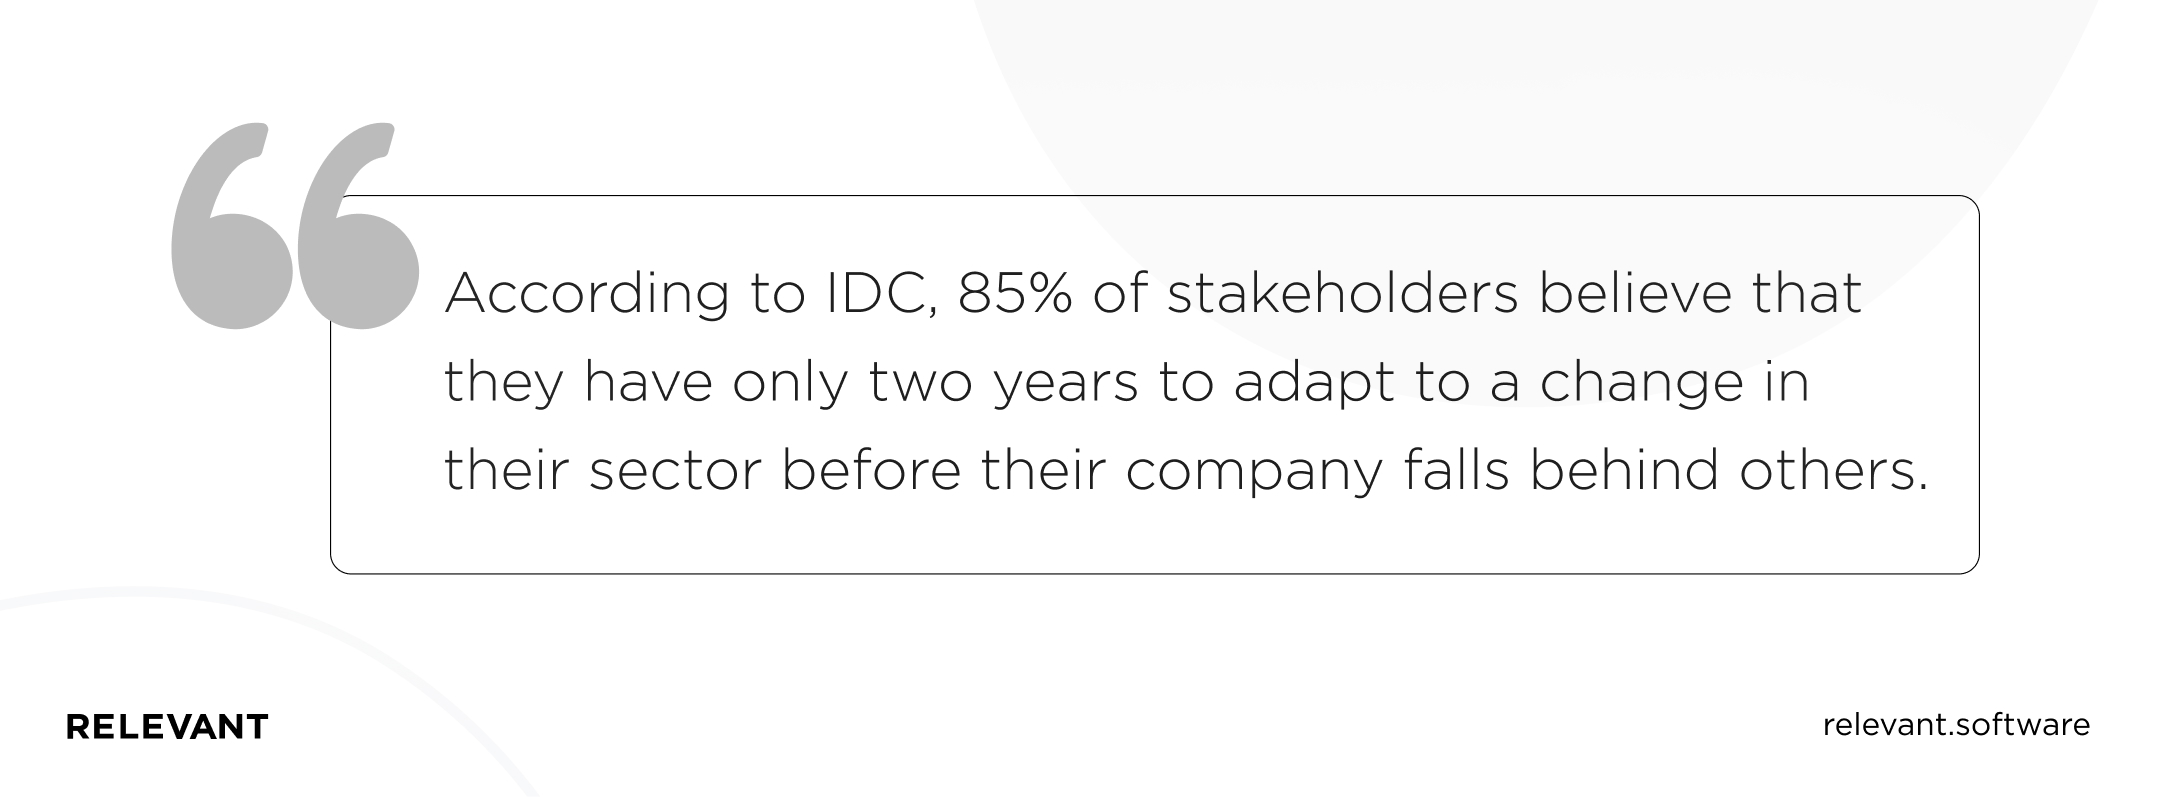 According to IDC, 85% of stakeholders believe that they have only two years to adapt to a change in their sector before their company falls behind others.